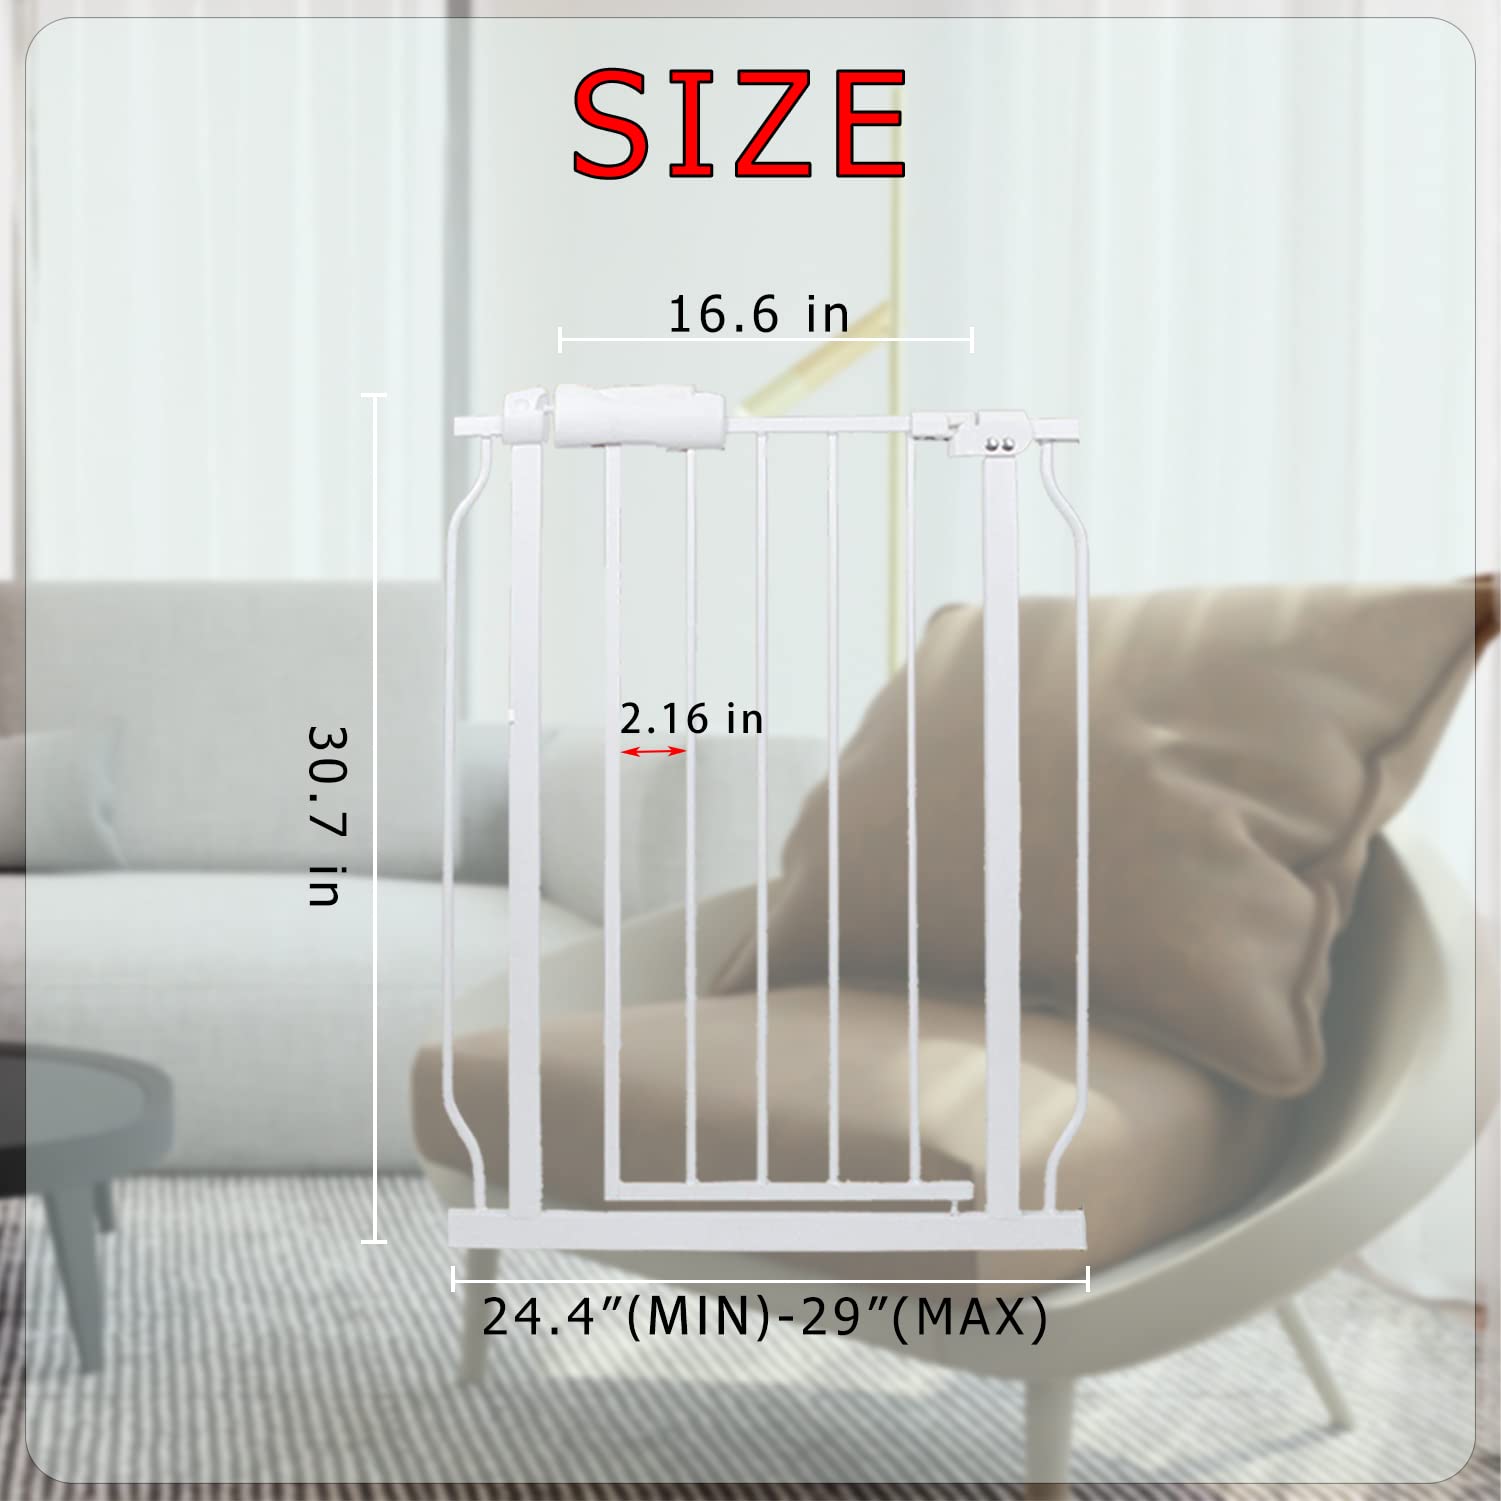 Thasamm Narrow Baby Gate 24"-29" for Doorways Stairs Tension Indoor Safety Gates White Metal Large Pressure Mounted Pet Gate Walk Through Long Safety Dog Gate for The House Doorways Stairs